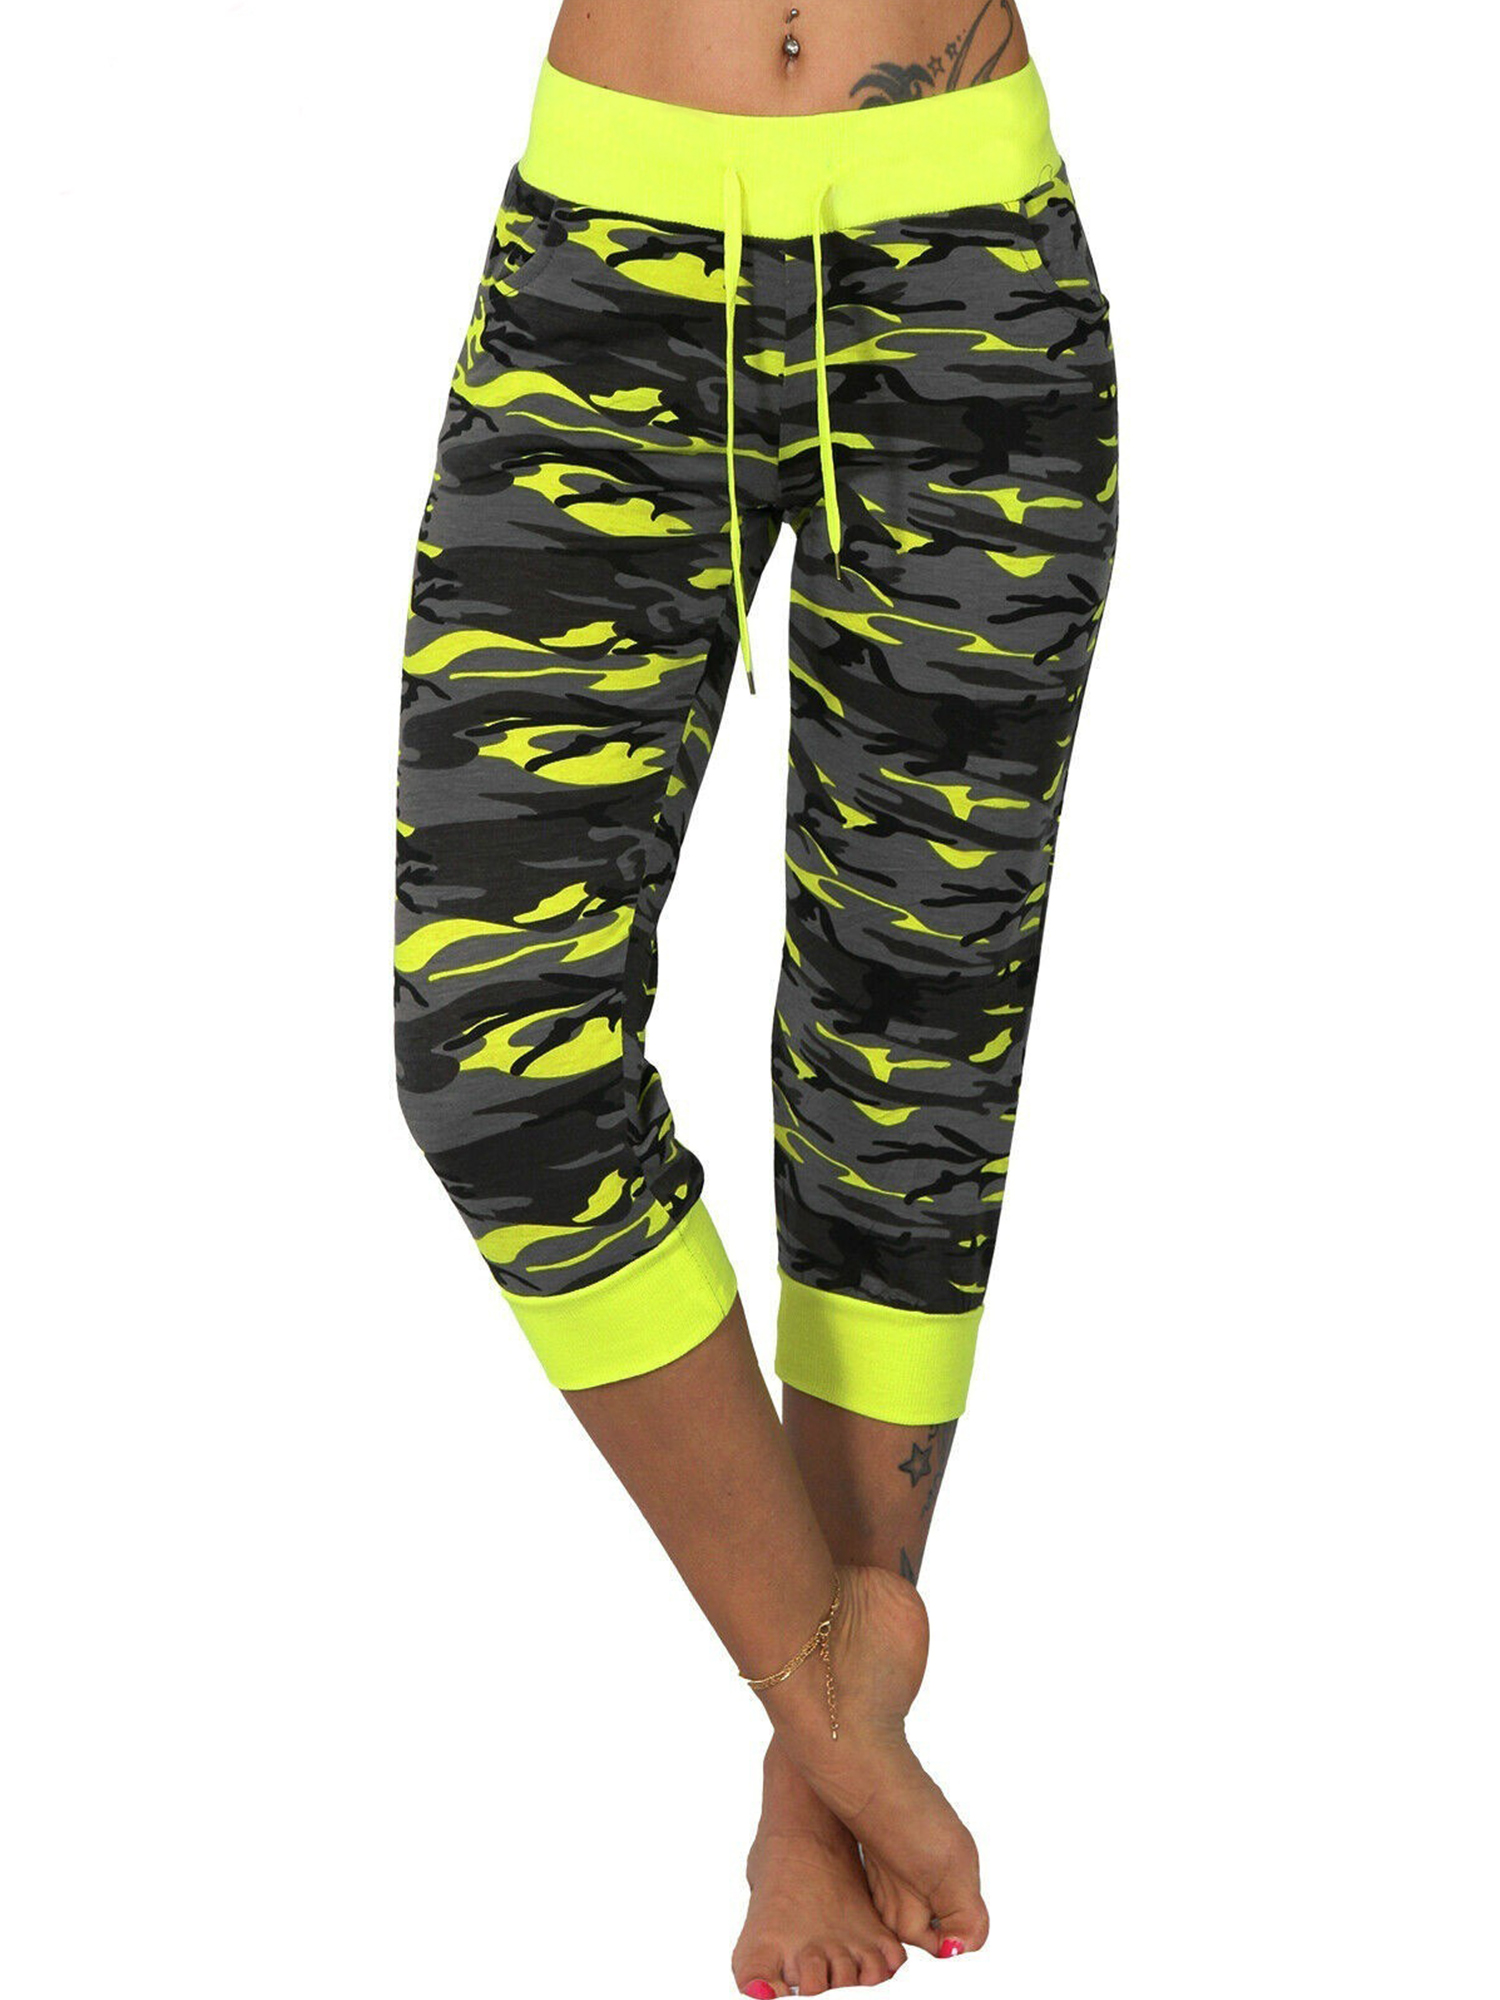 Women Oversized Camo Running Fitness Leggings Pants Skinny Crop Leg Pants Tummy Control Pockets Jegging Capris for Ladies Active Workout Trousers - image 1 of 2